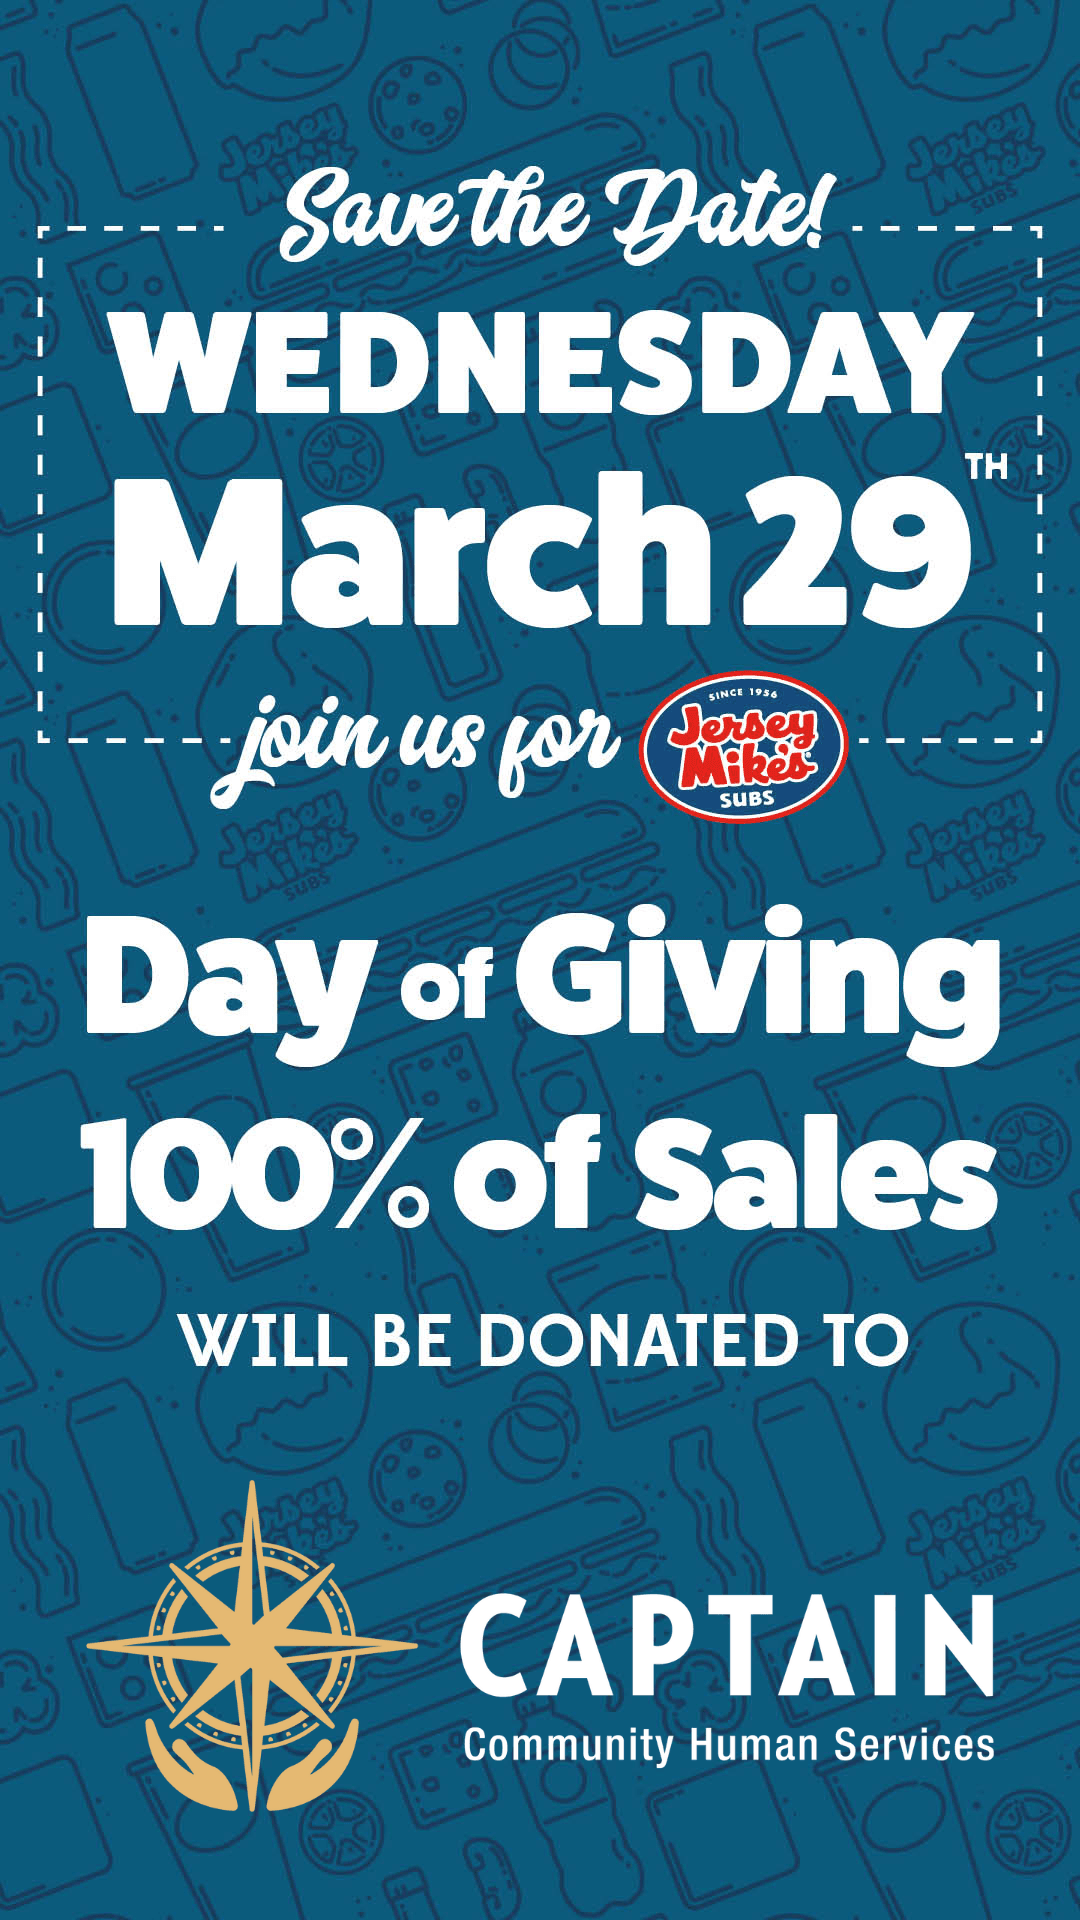 Save the Date: Jersey Mikes Day of Giving - March 29th!